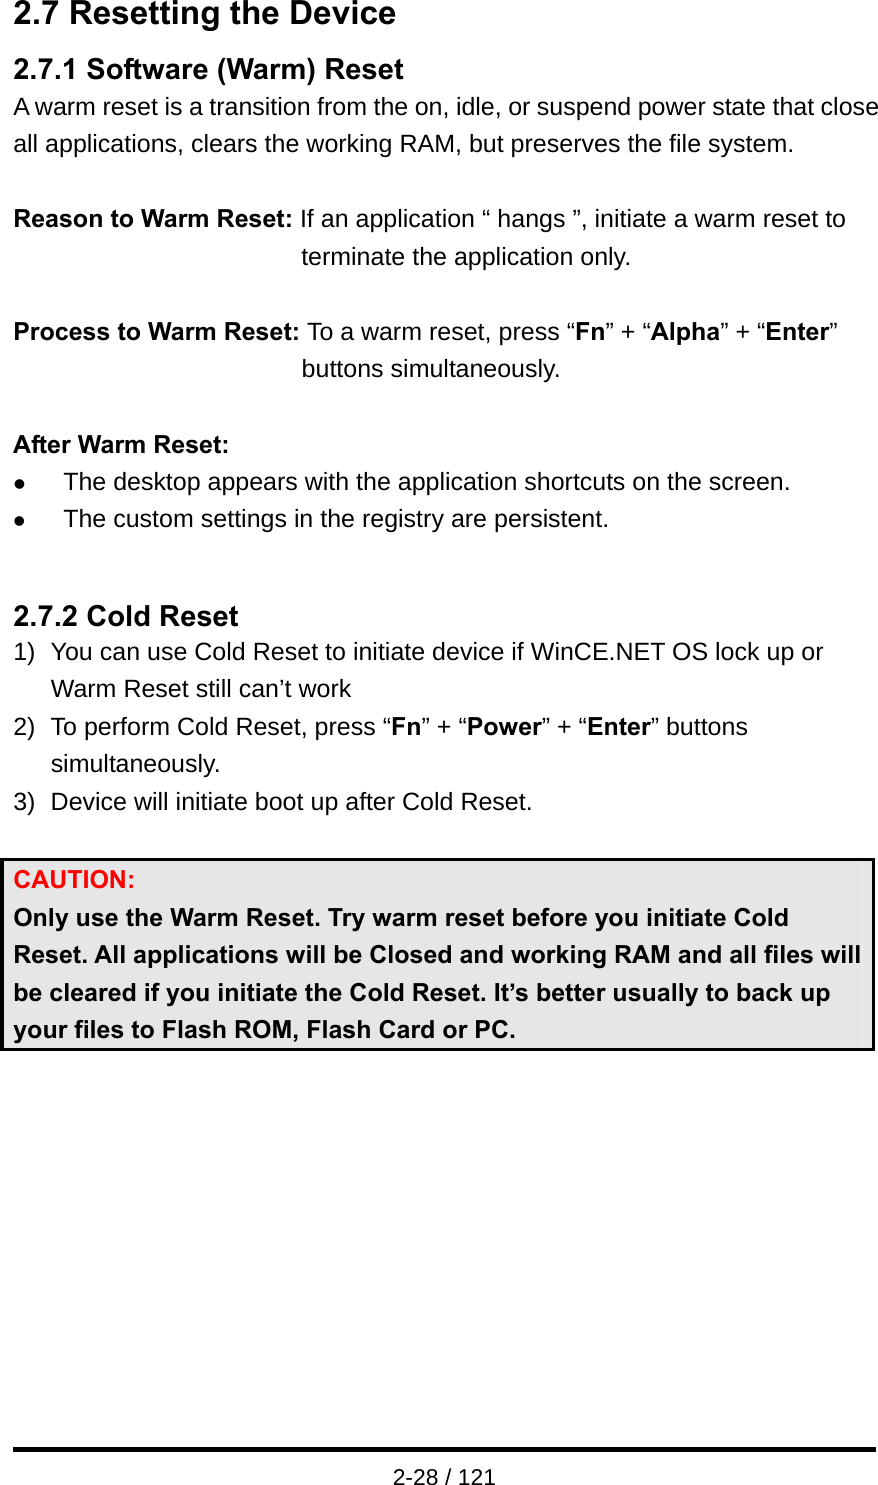  2-28 / 121 2.7 Resetting the Device 2.7.1 Software (Warm) Reset A warm reset is a transition from the on, idle, or suspend power state that close all applications, clears the working RAM, but preserves the file system.  Reason to Warm Reset: If an application “ hangs ”, initiate a warm reset to terminate the application only.  Process to Warm Reset: To a warm reset, press “Fn” + “Alpha” + “Enter” buttons simultaneously.  After Warm Reset: z The desktop appears with the application shortcuts on the screen. z The custom settings in the registry are persistent.   2.7.2 Cold Reset 1)  You can use Cold Reset to initiate device if WinCE.NET OS lock up or Warm Reset still can’t work 2)  To perform Cold Reset, press “Fn” + “Power” + “Enter” buttons simultaneously. 3)  Device will initiate boot up after Cold Reset.  CAUTION:  Only use the Warm Reset. Try warm reset before you initiate Cold Reset. All applications will be Closed and working RAM and all files will be cleared if you initiate the Cold Reset. It’s better usually to back up your files to Flash ROM, Flash Card or PC.    